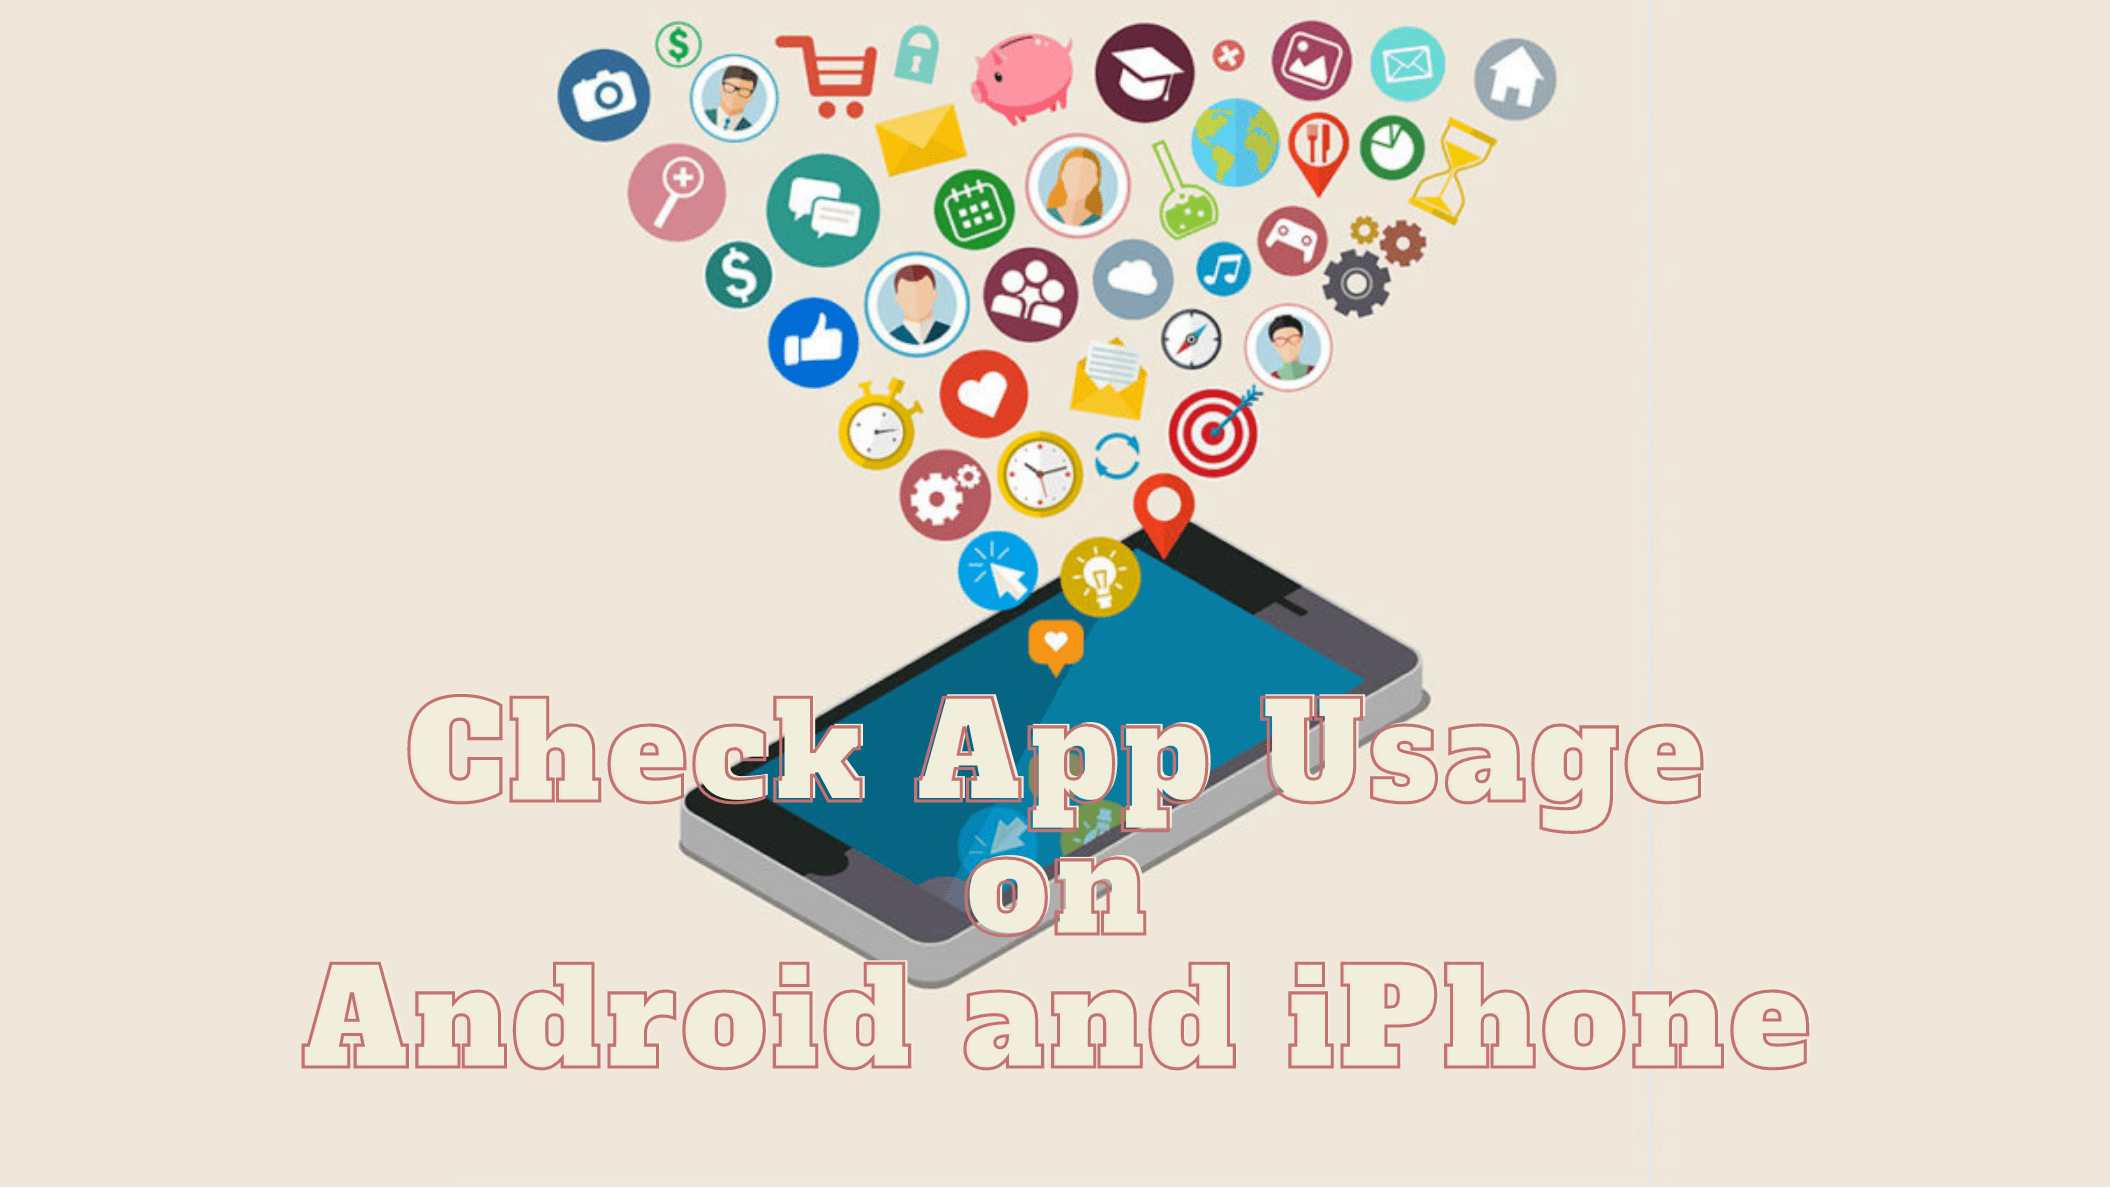 How to Check App Usage on Android and iPhone